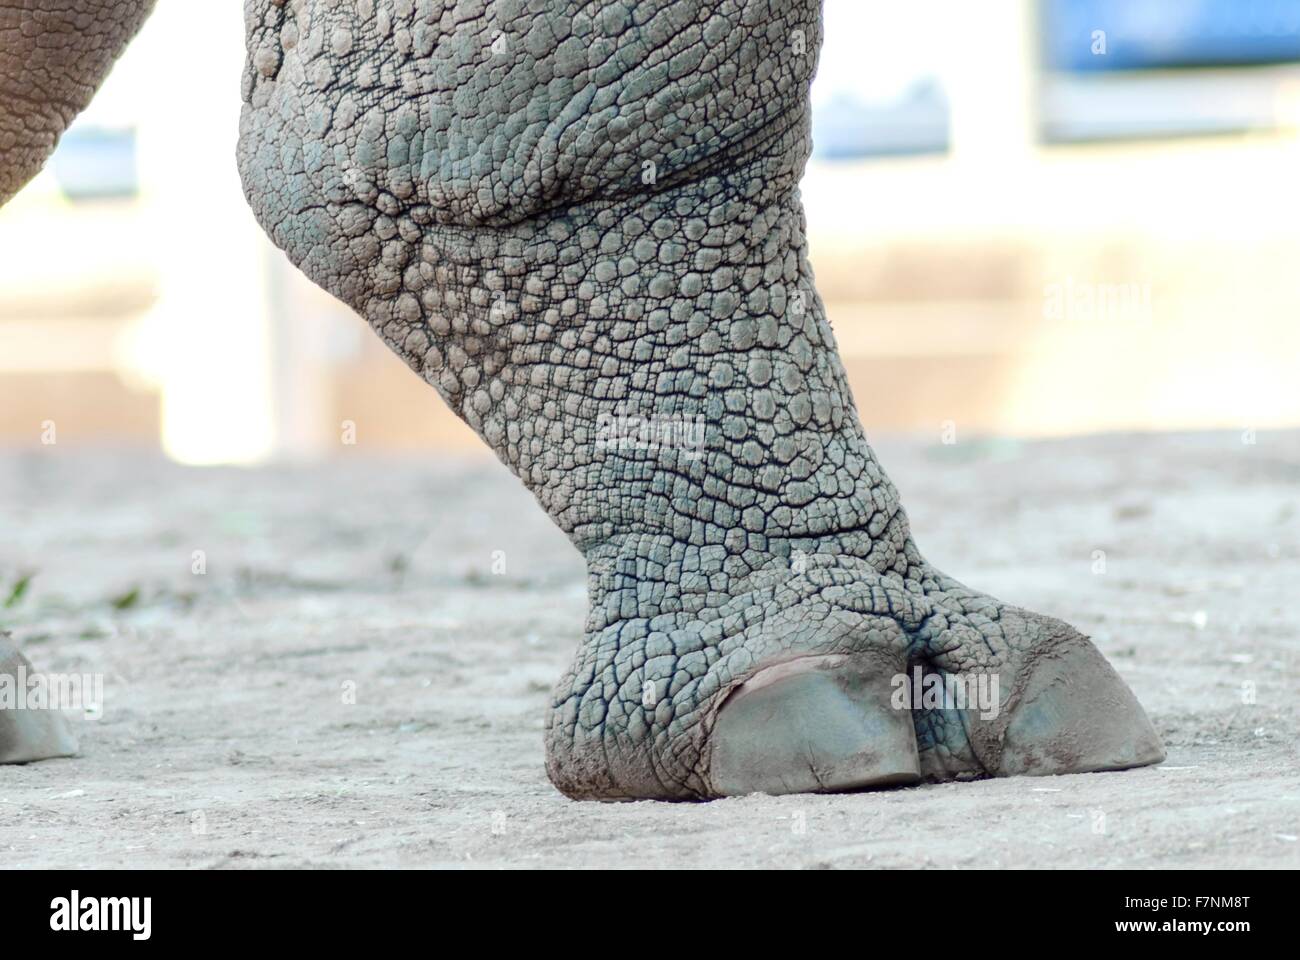 A close up view of a rhinoceros leg. It appears to be a strong, rough leg crashing the ground with its foot while the skin appea Stock Photo